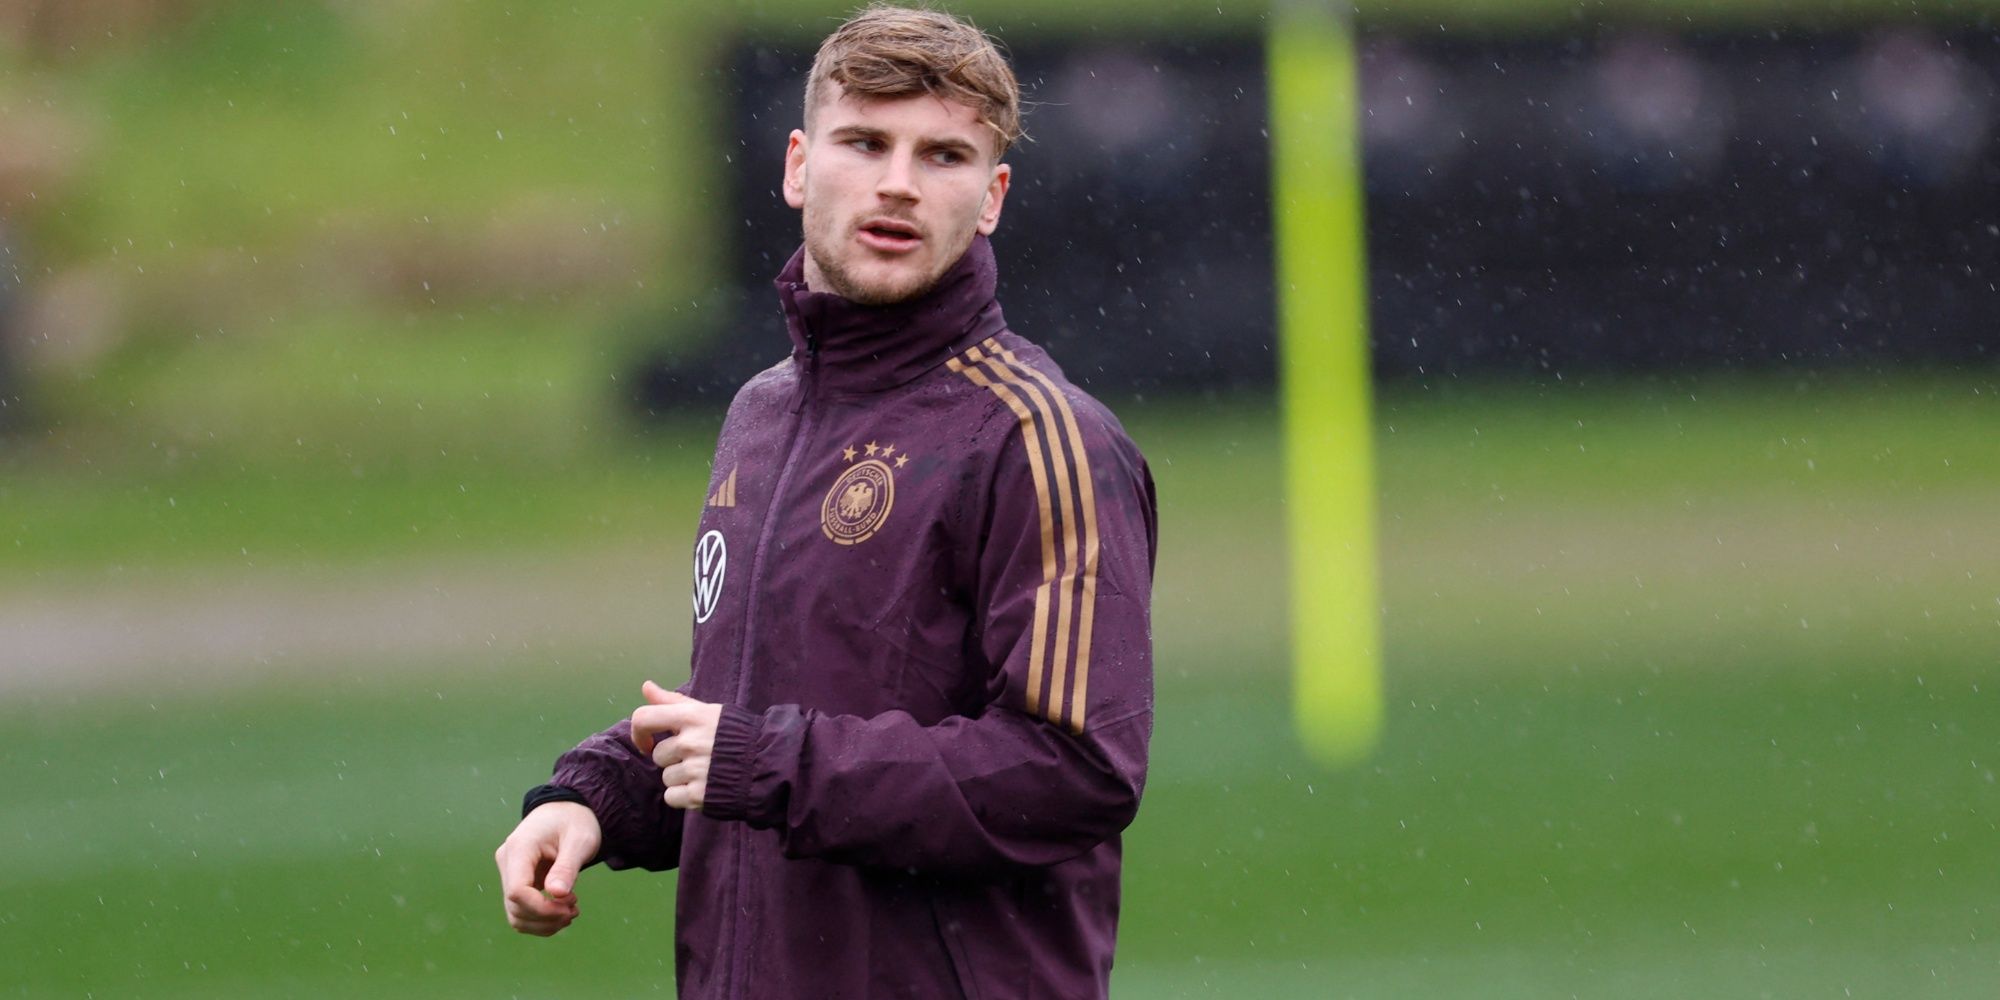 Tottenham Hotspur and Germany forward Timo Werner